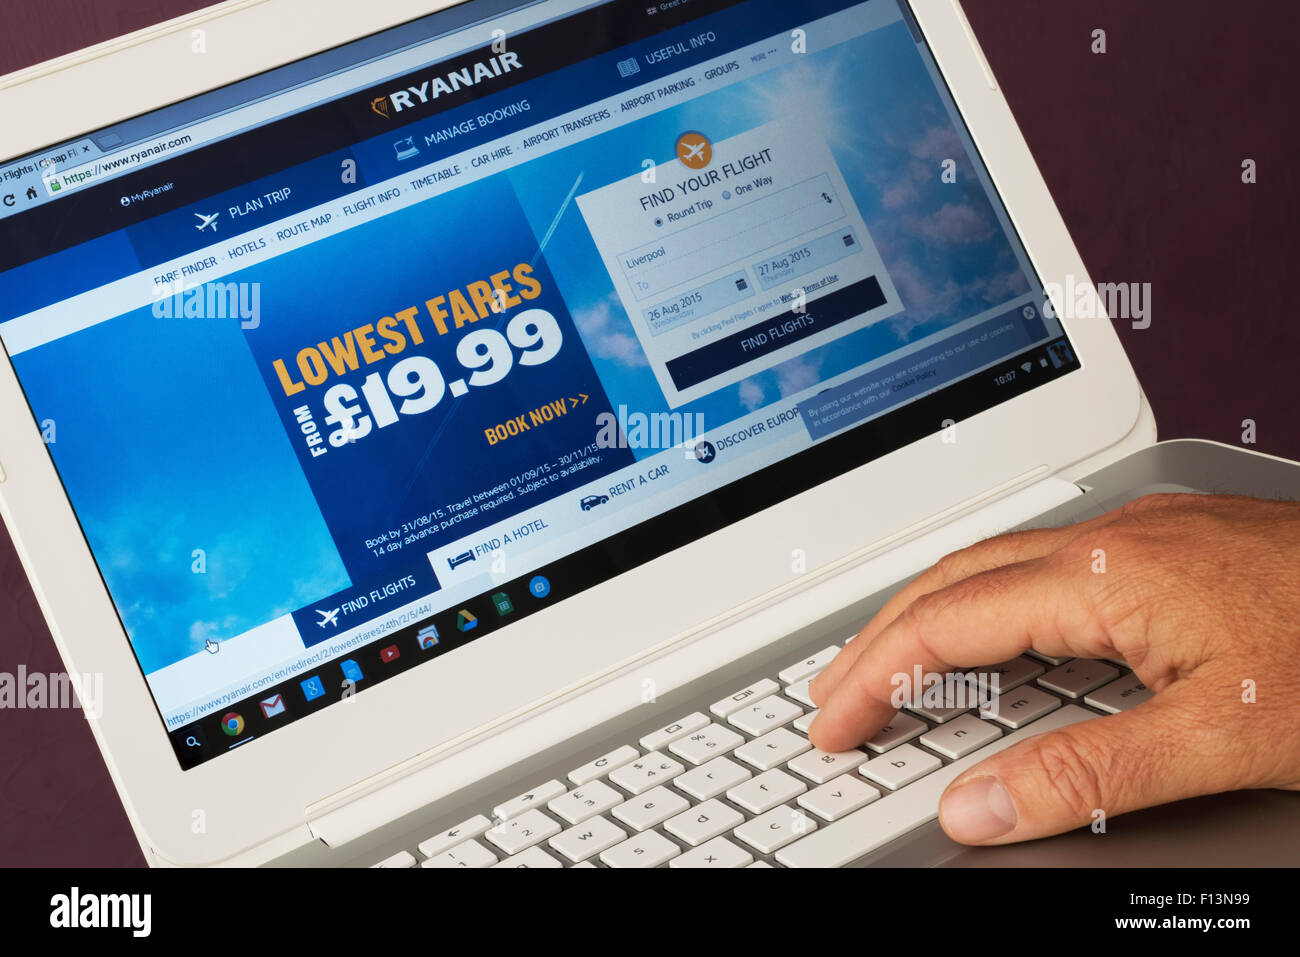 Website belonging to Ryan Air being viewed on a laptop computer Stock Photo